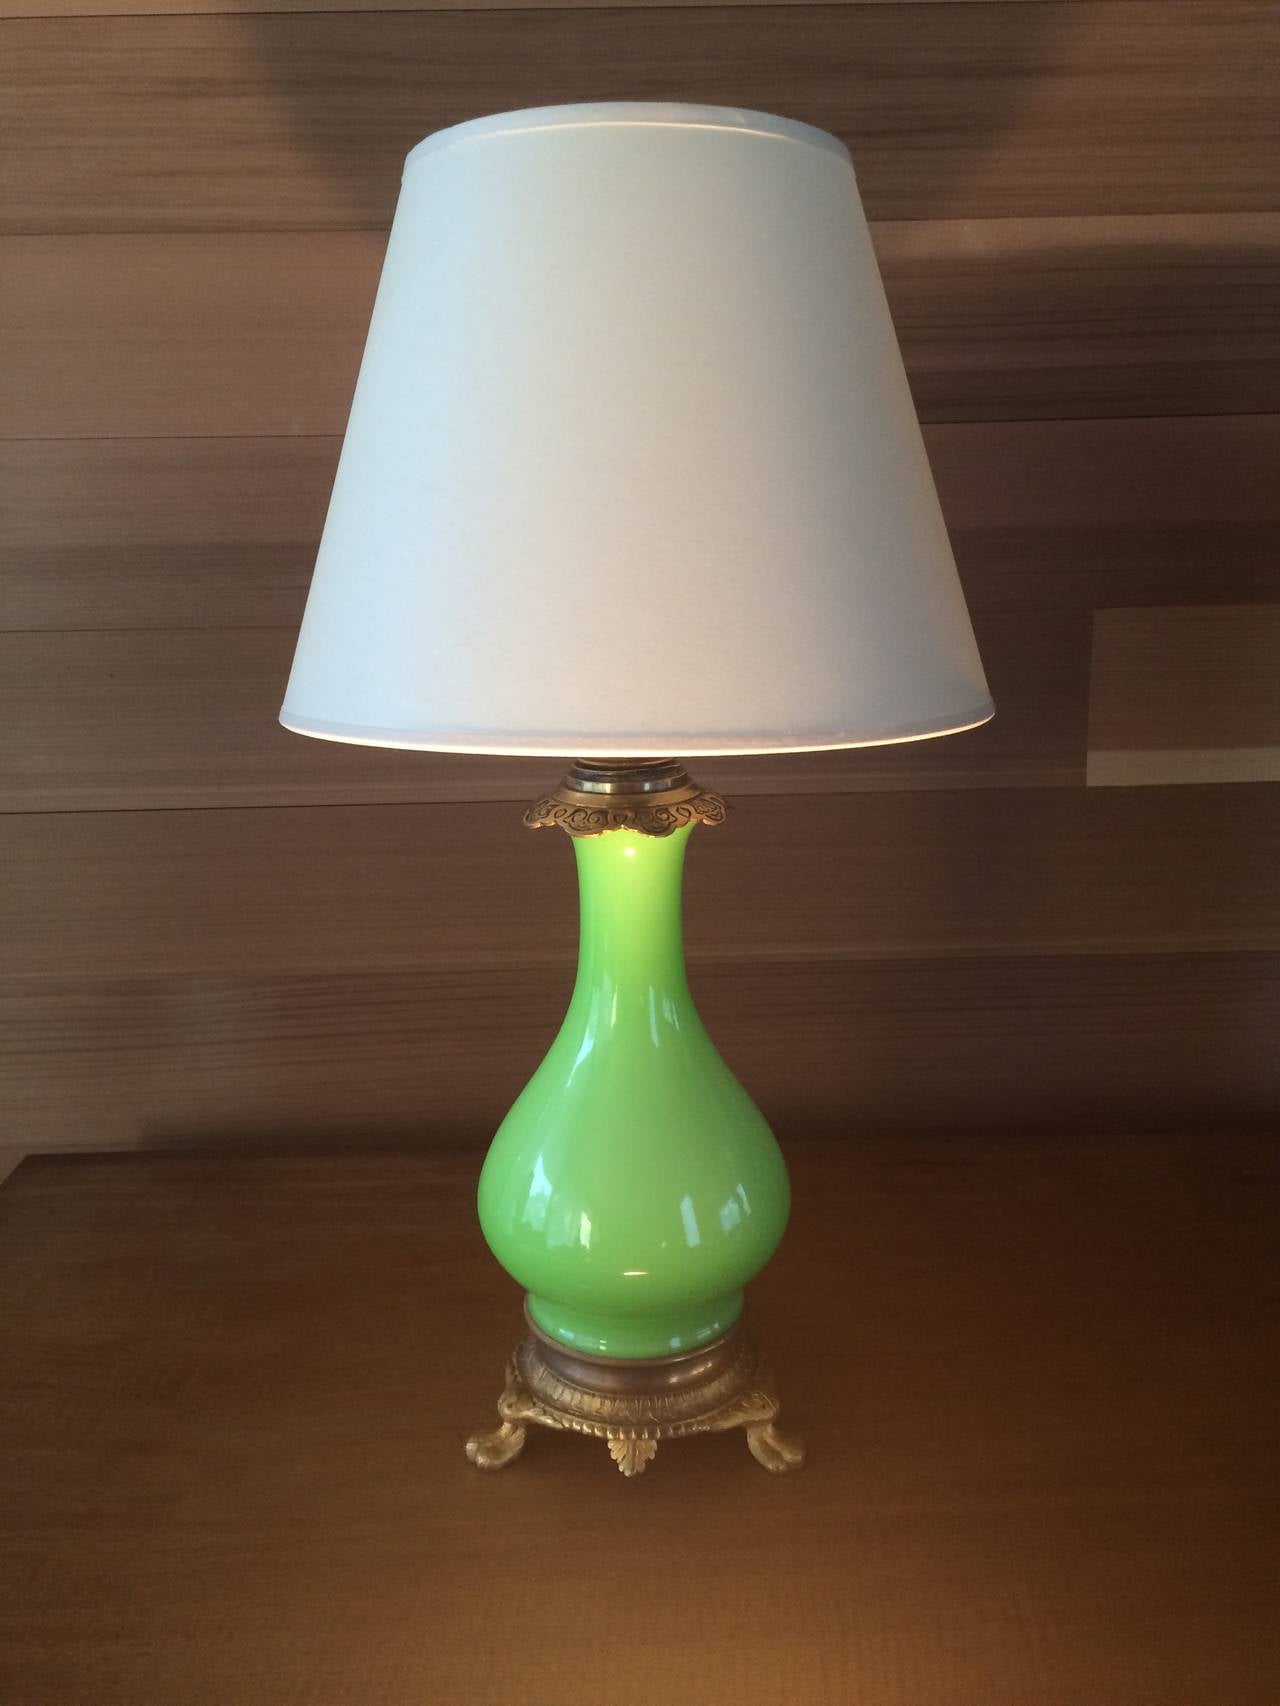 A 19th century lime green opaline glass table lamp mounted on a gilt bronze ormolu base. Lamp CAP later 20th century (when wired for electricity),
France, circa 1880. Shade not included. 